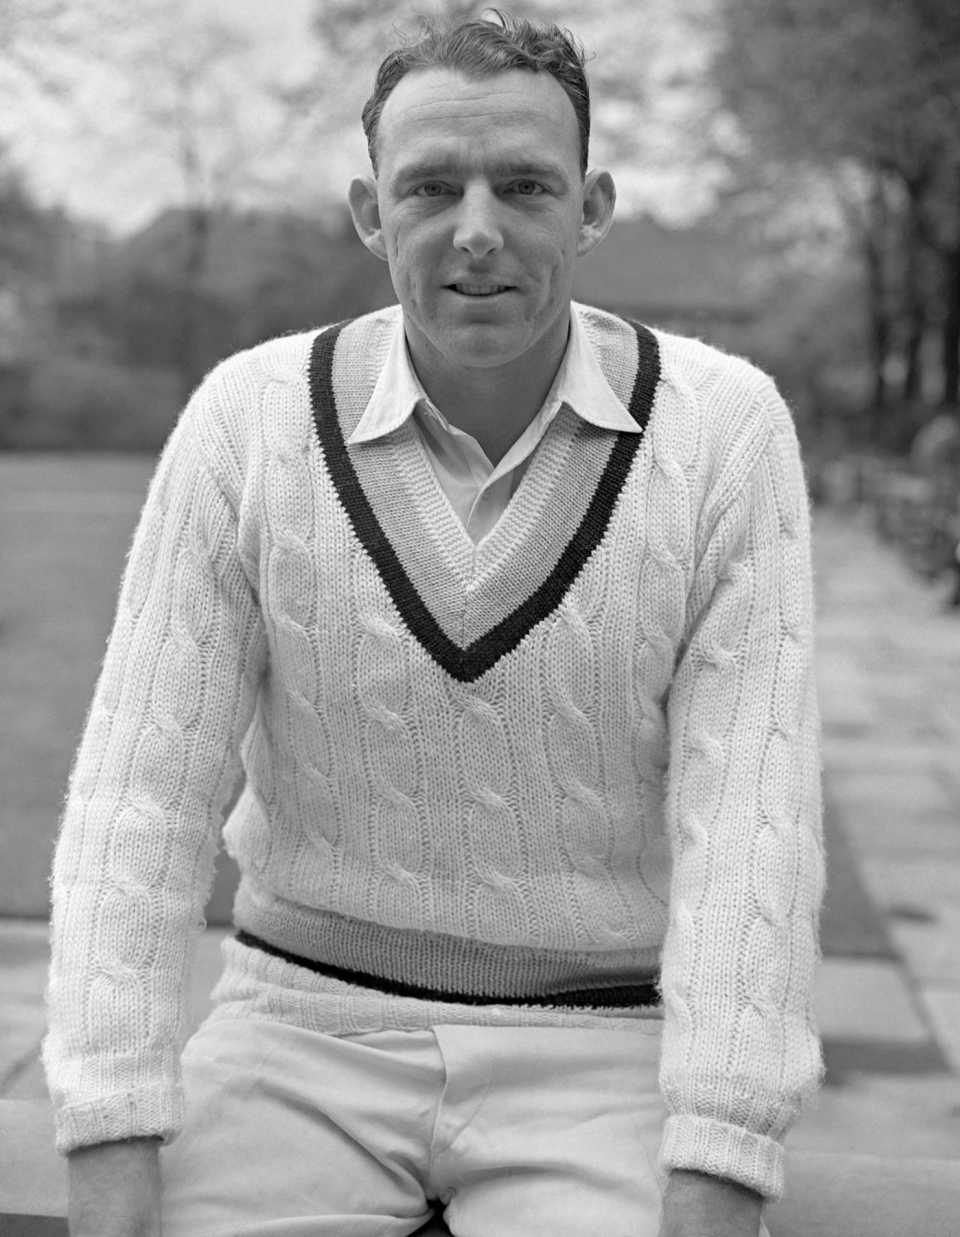 Bob Appleyard poses for a photo during Yorkshire's match against the MCC